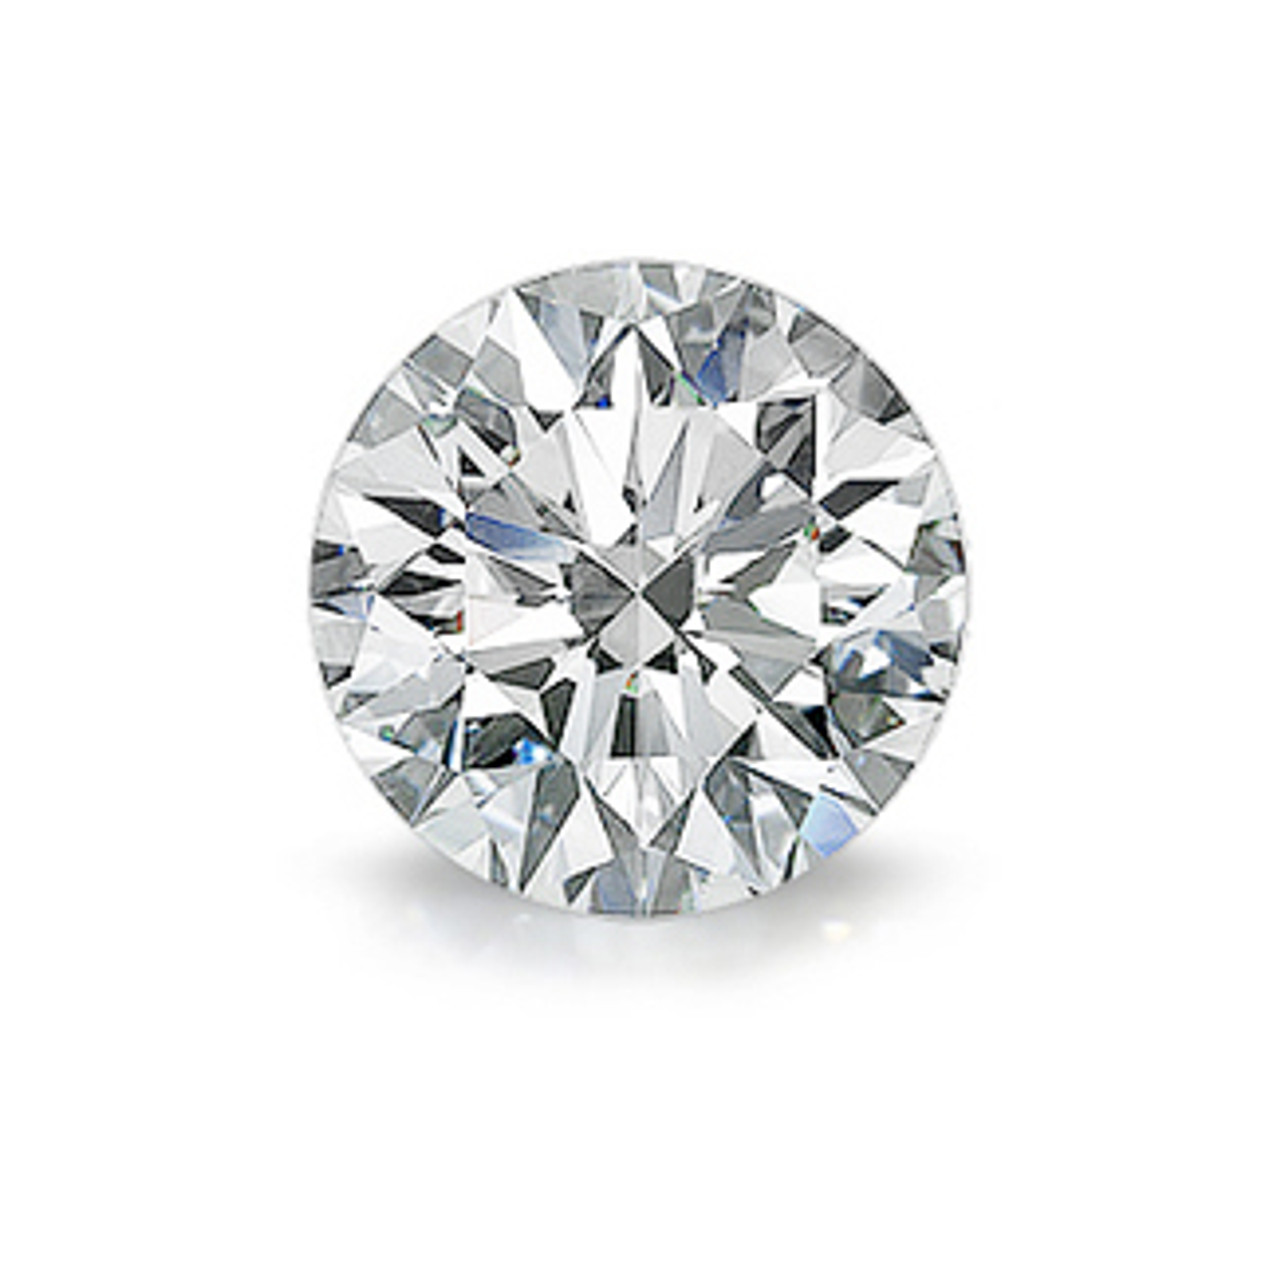 https://cdn11.bigcommerce.com/s-2190vfx/images/stencil/1280x1280/products/3534/11456/ROUND-CUBIC-ZIRCONIA-LOOSE-STONE-325__94832.1484769435.jpg?c=2?imbypass=on